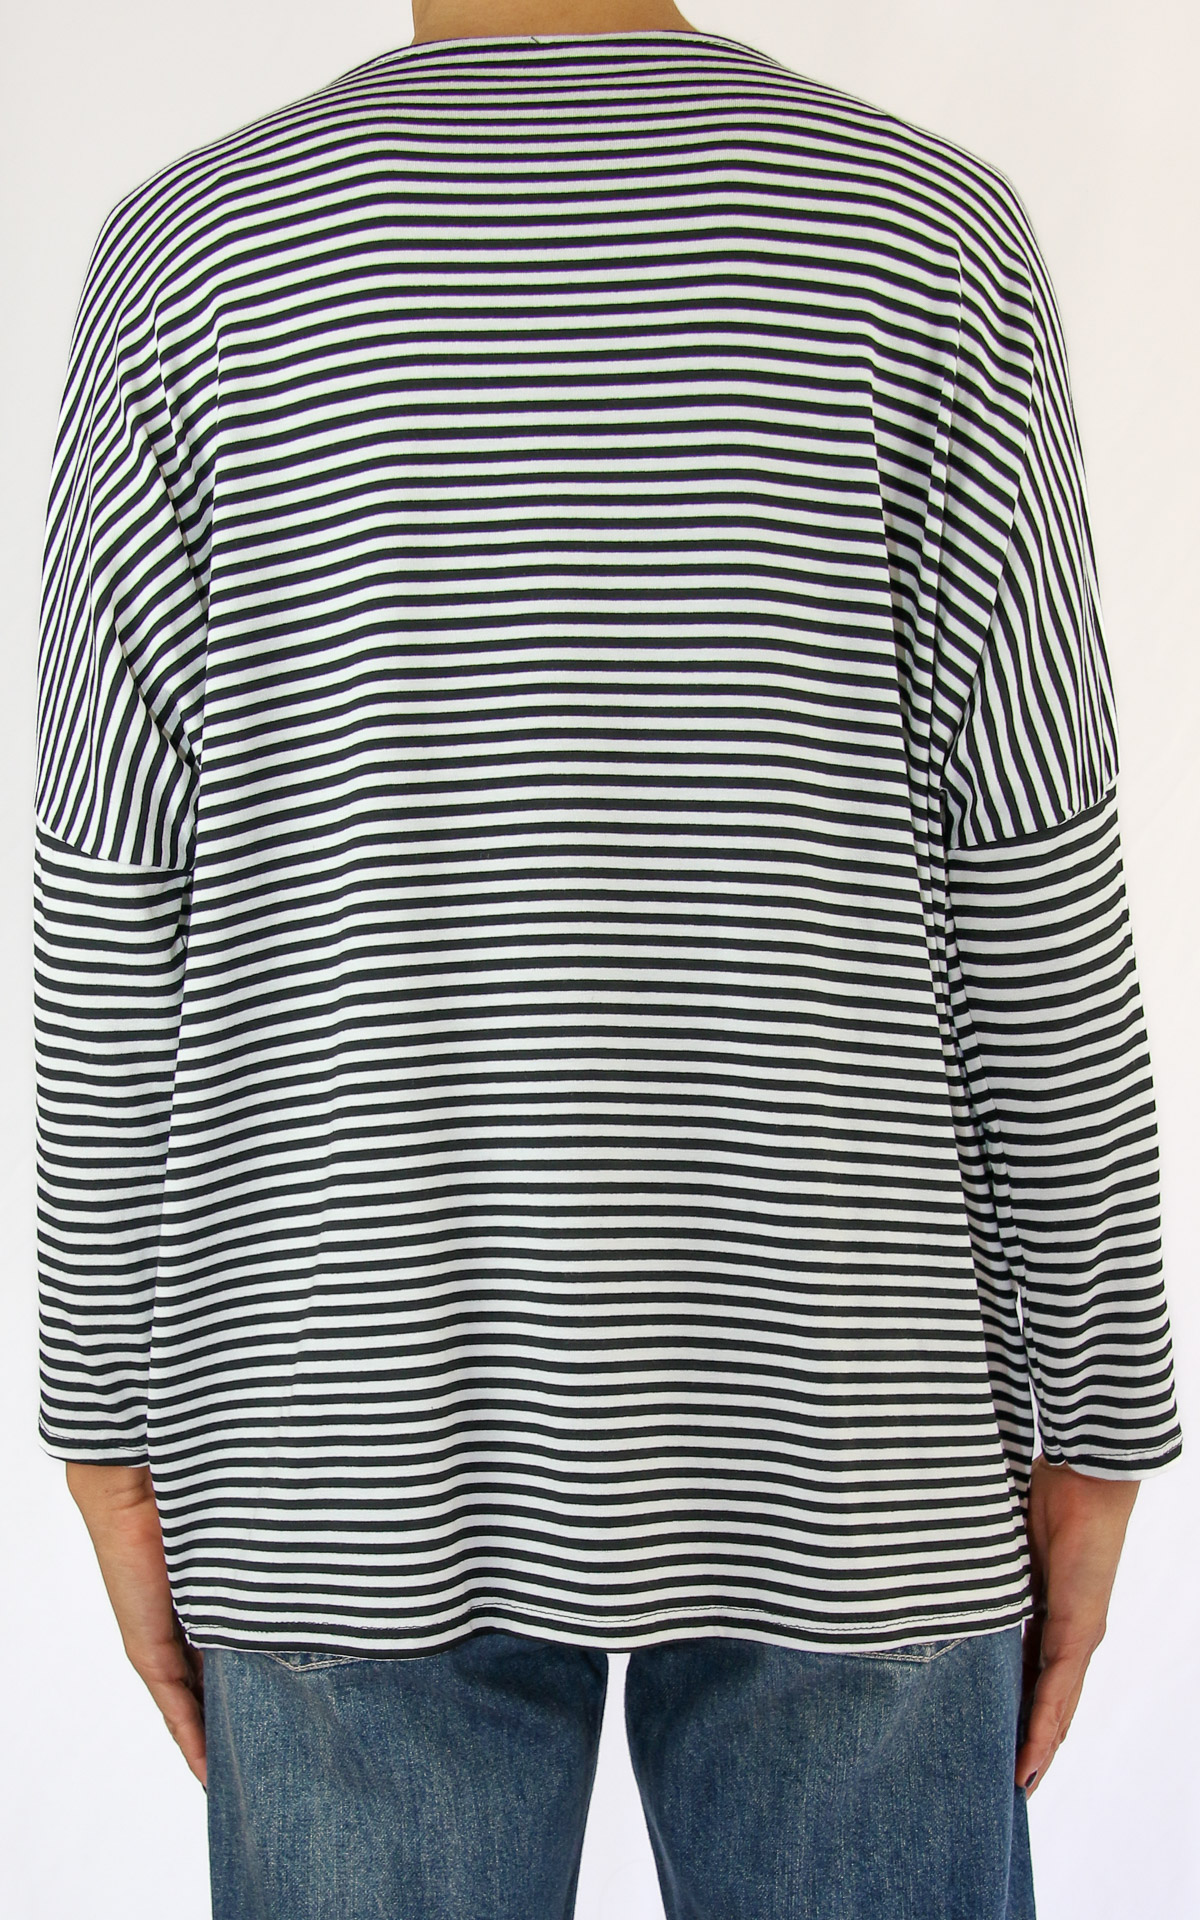 Off-On - t-shirt oversize a righe - bianco/nero